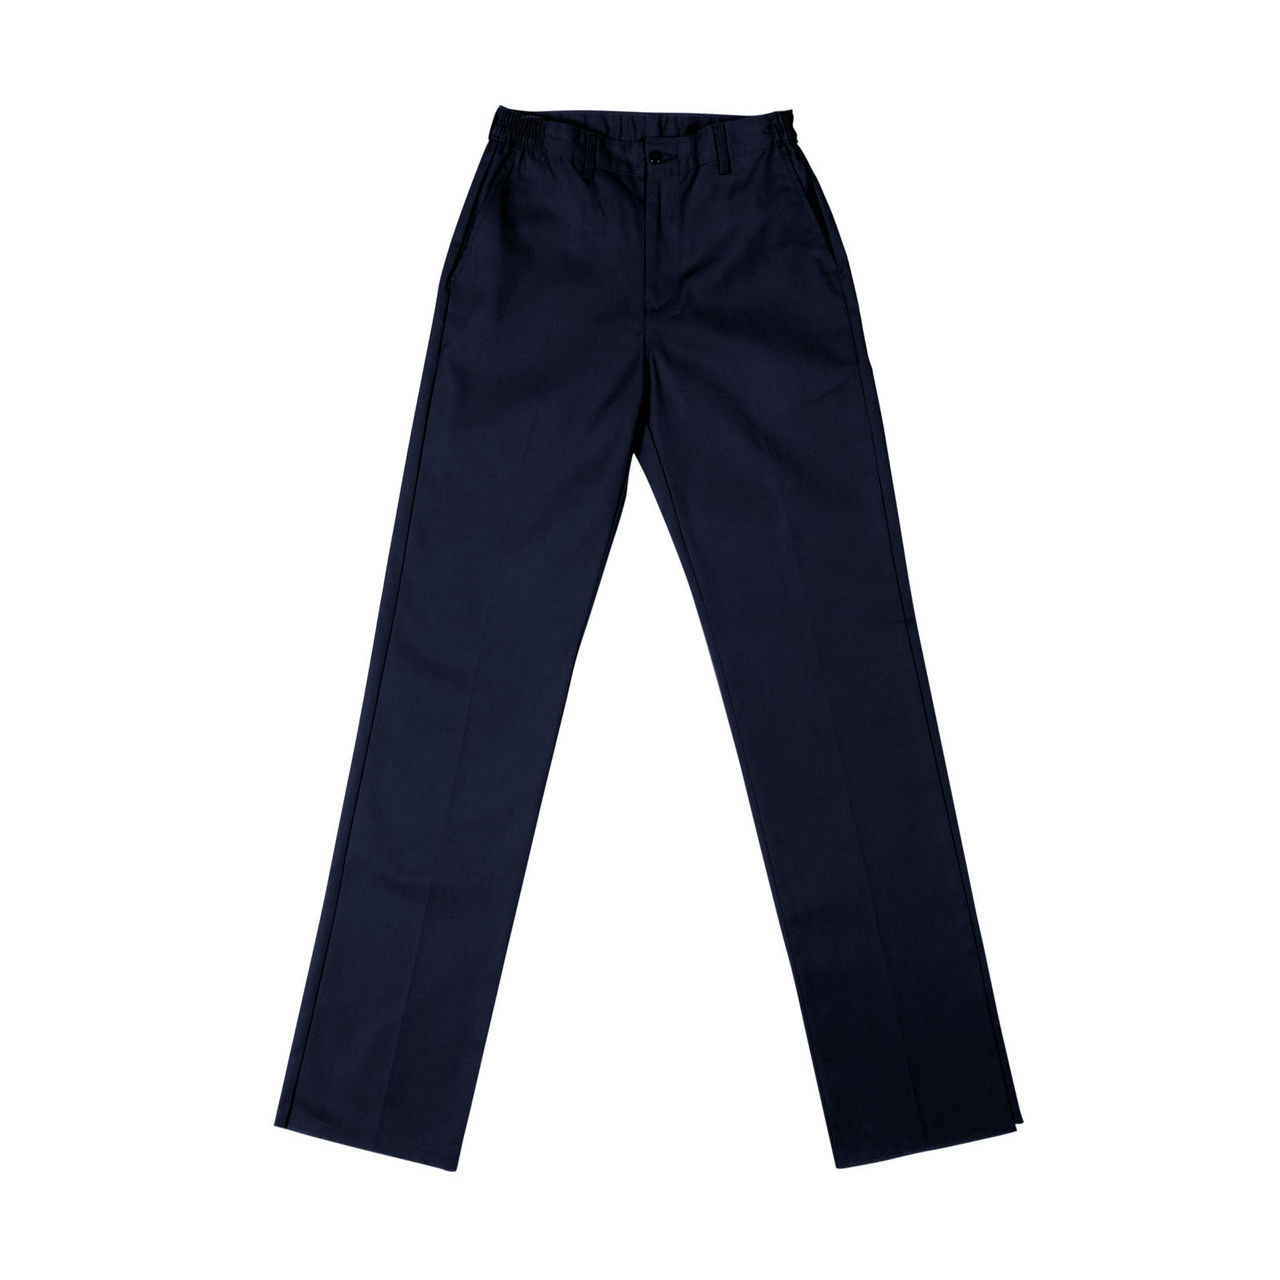 What is the hue of the P26 blue work pants for women with a comfort fit flex waist?